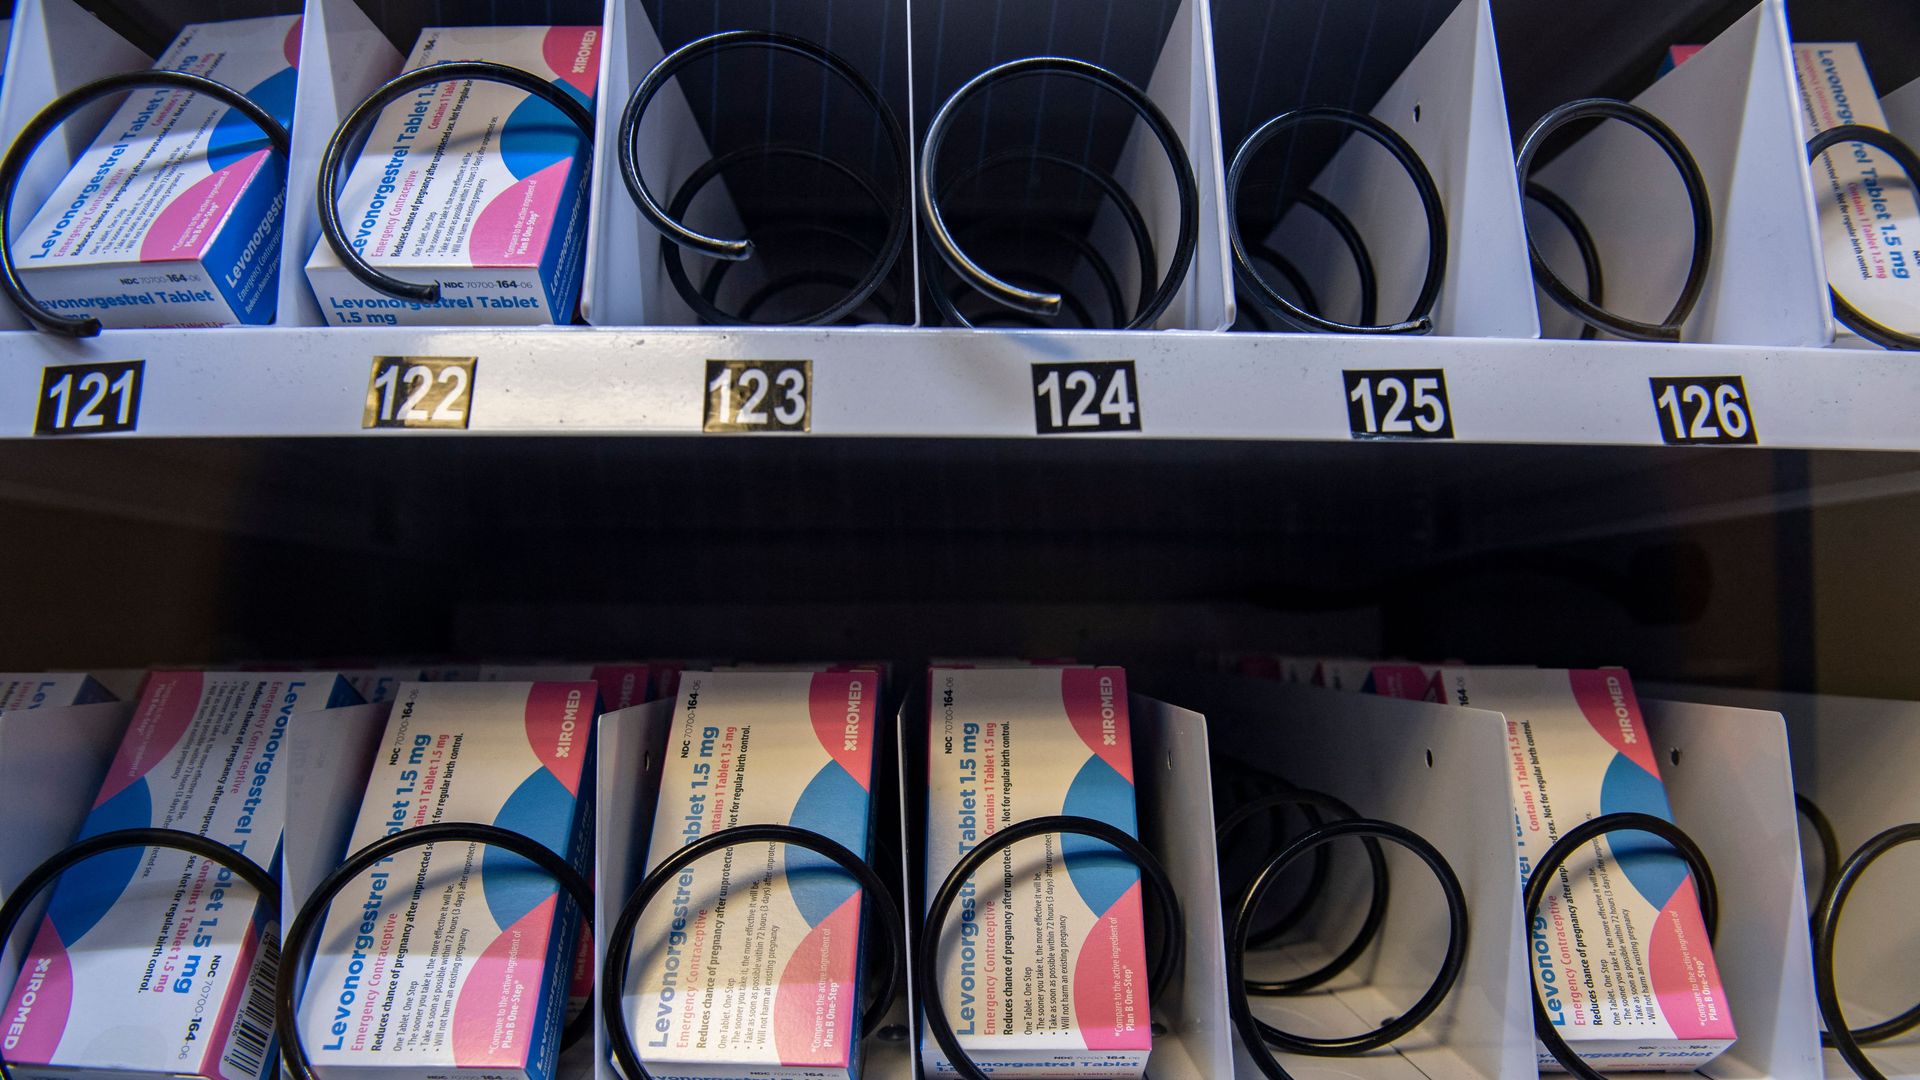 Boxes of Plan B in a vending machine 